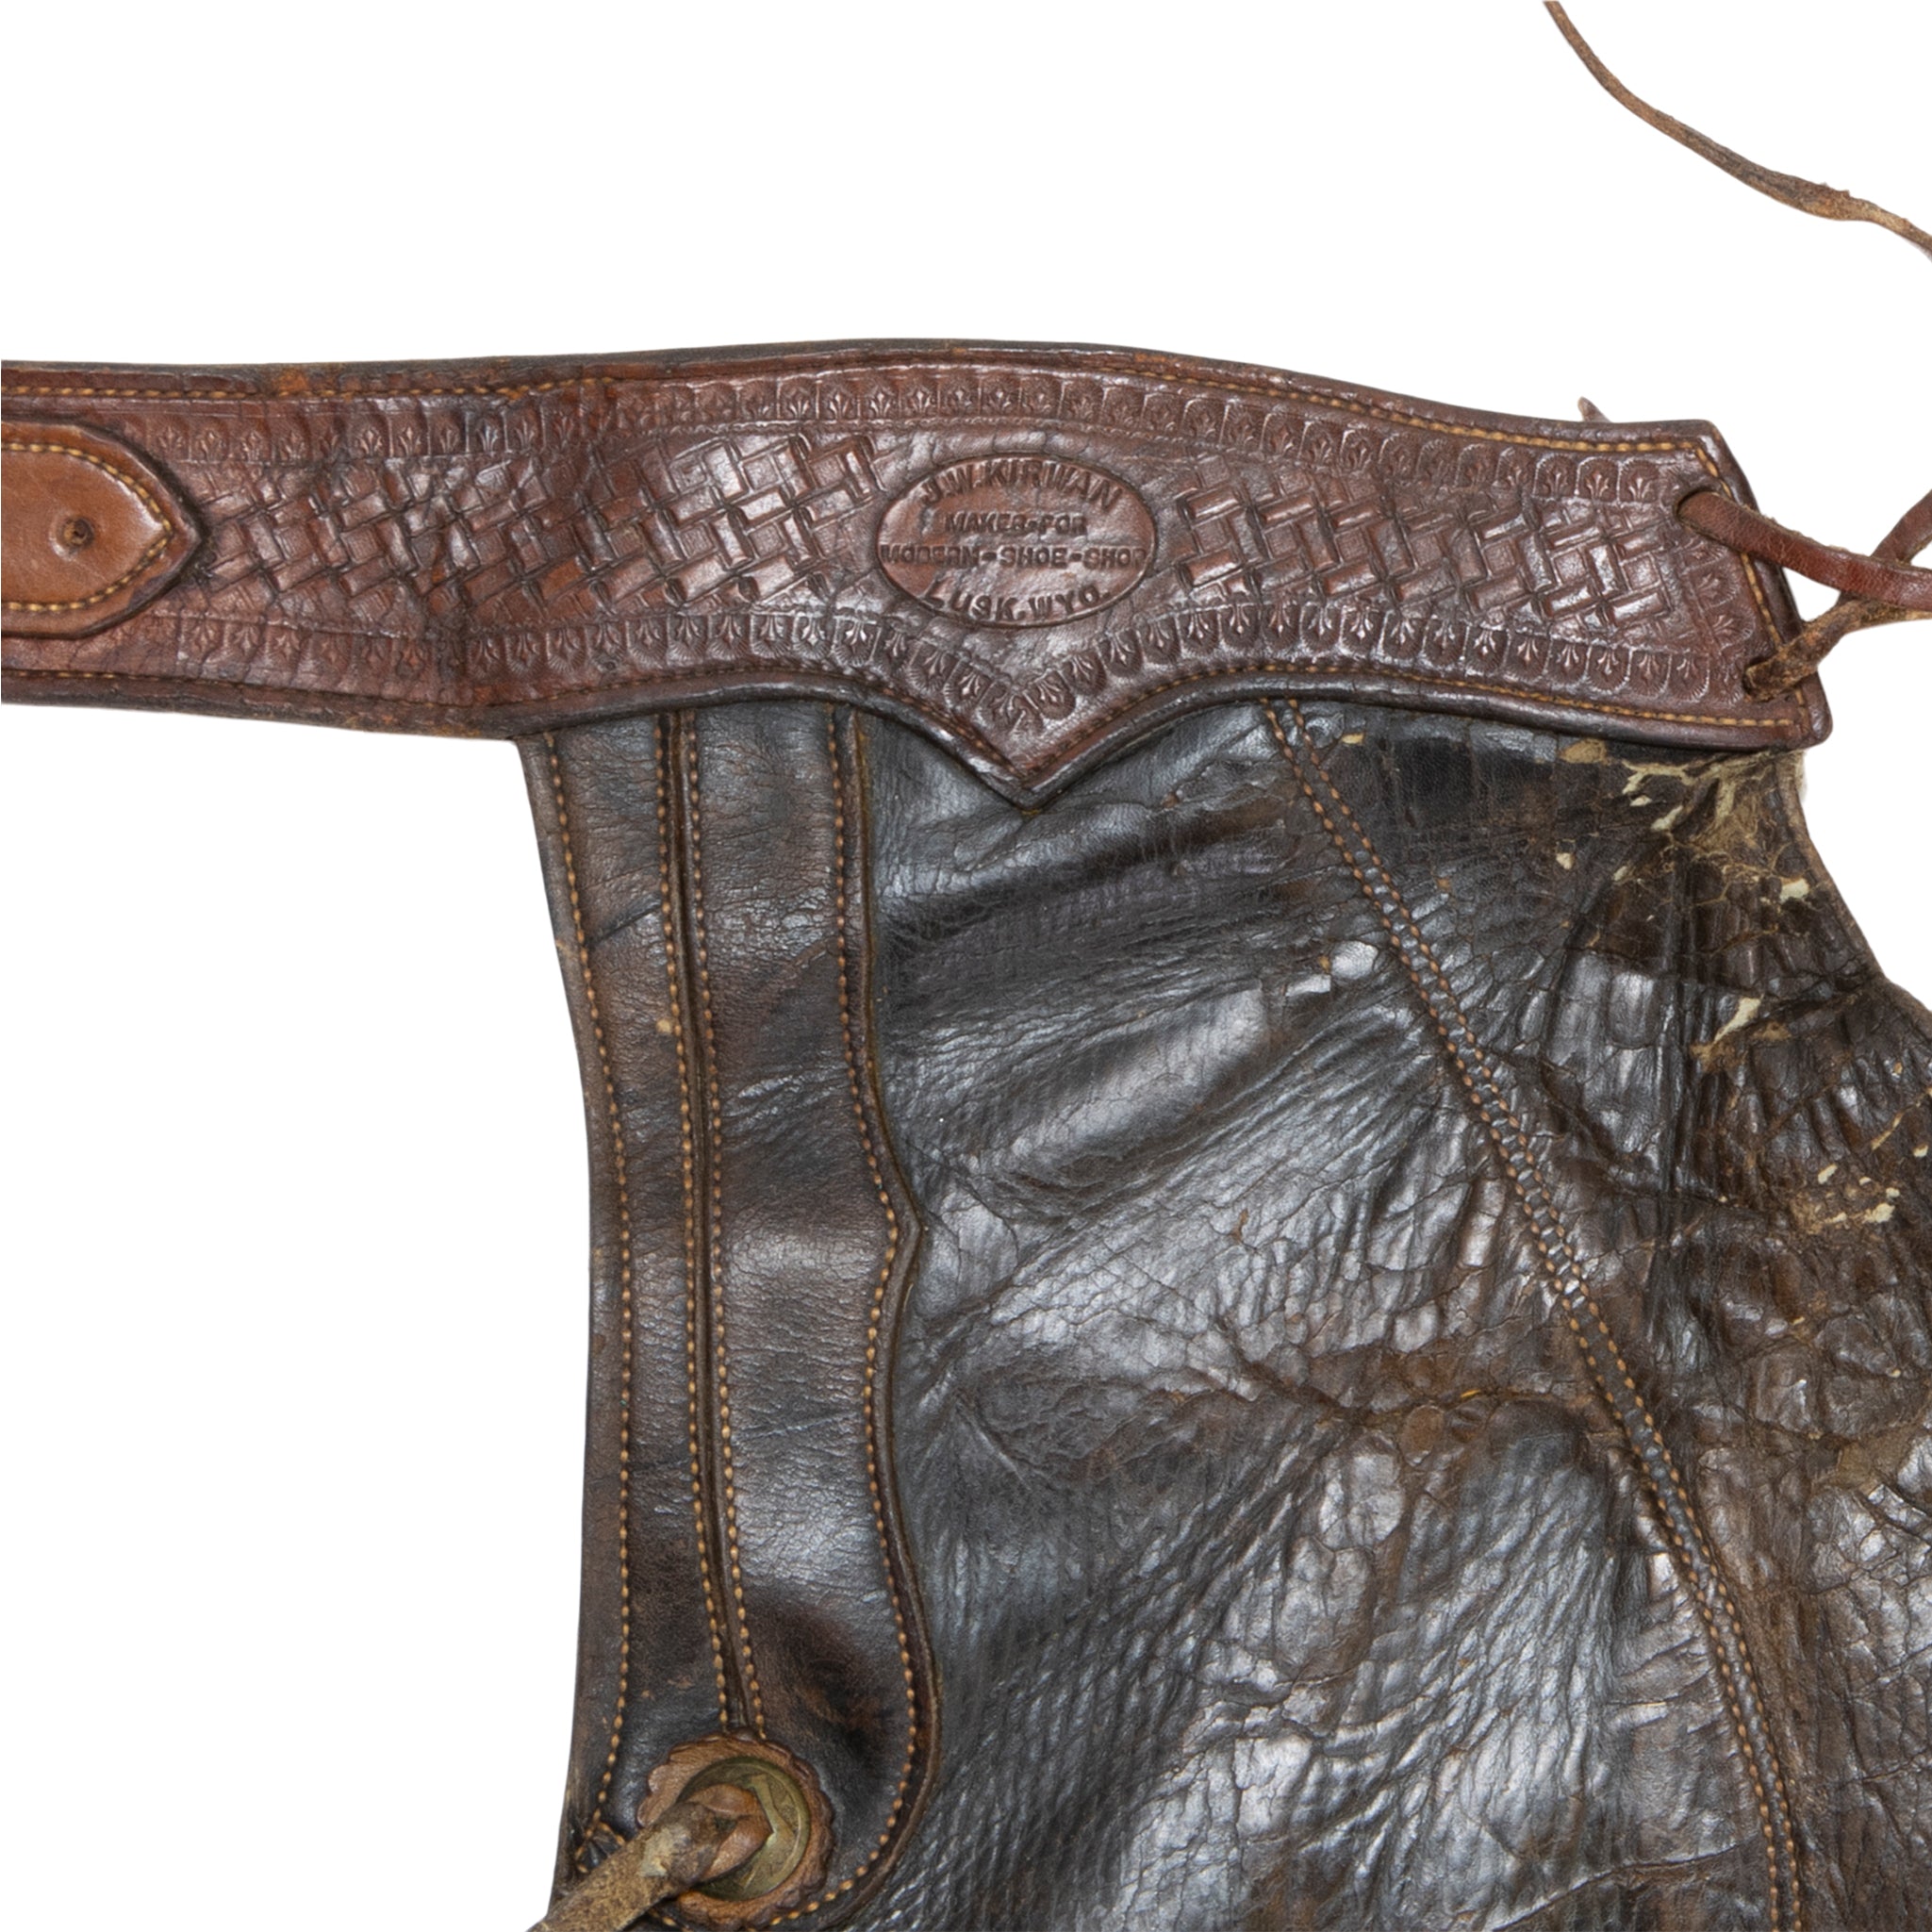 Batwing Chaps with Studs